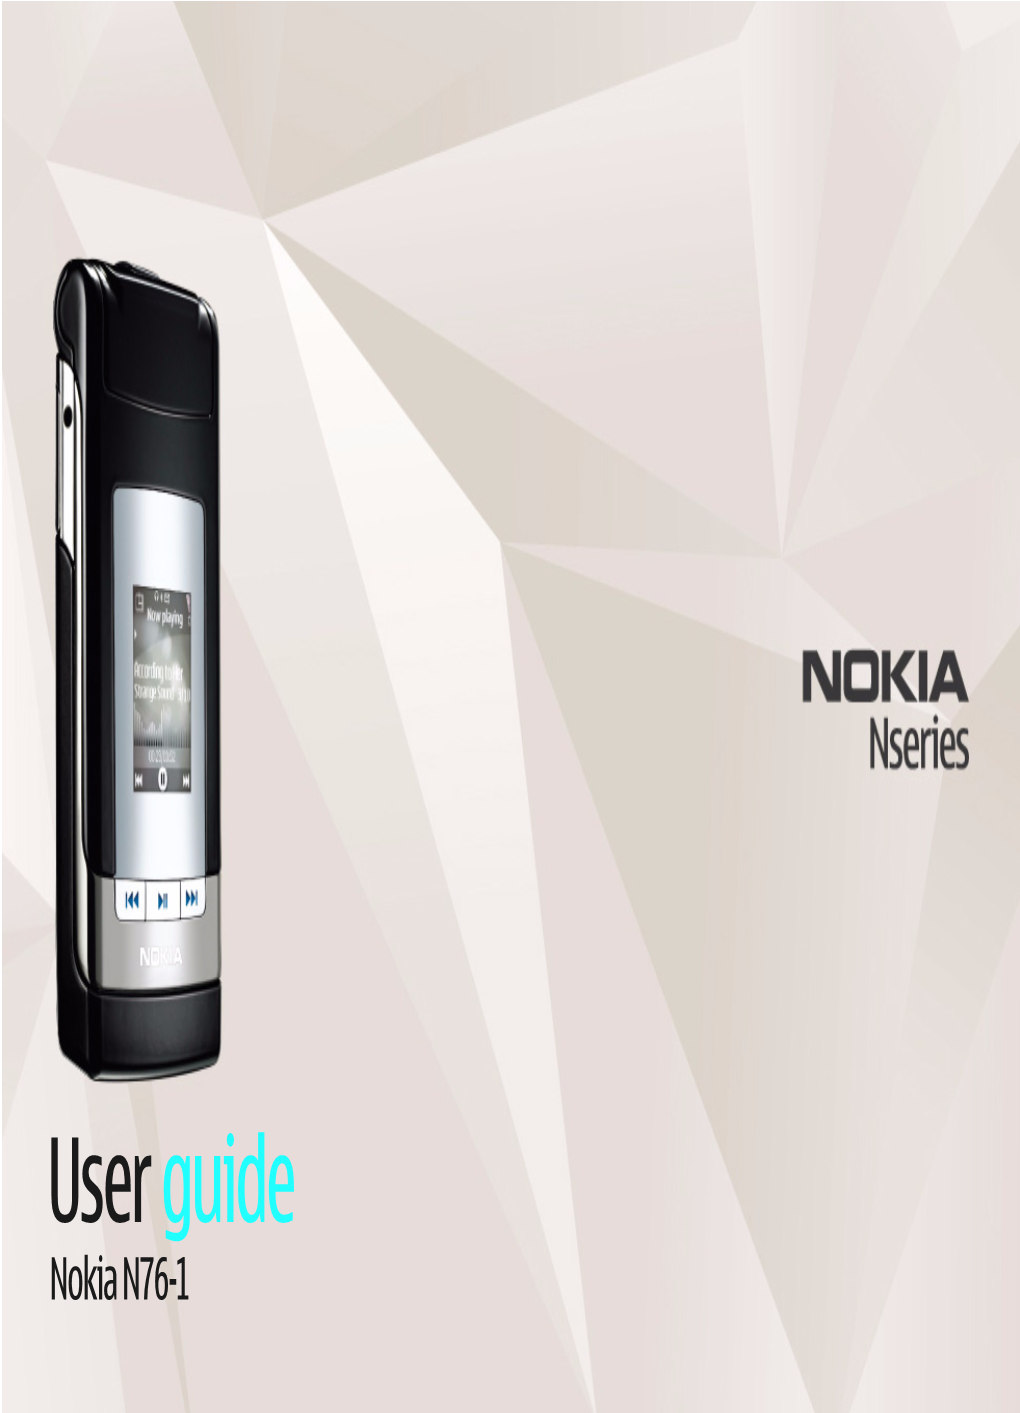 Your Nokia Dealer for Details, and Reproduction, Transfer, Distribution, Or Storage of Part Or All of the Contents in This Availability of Language Options